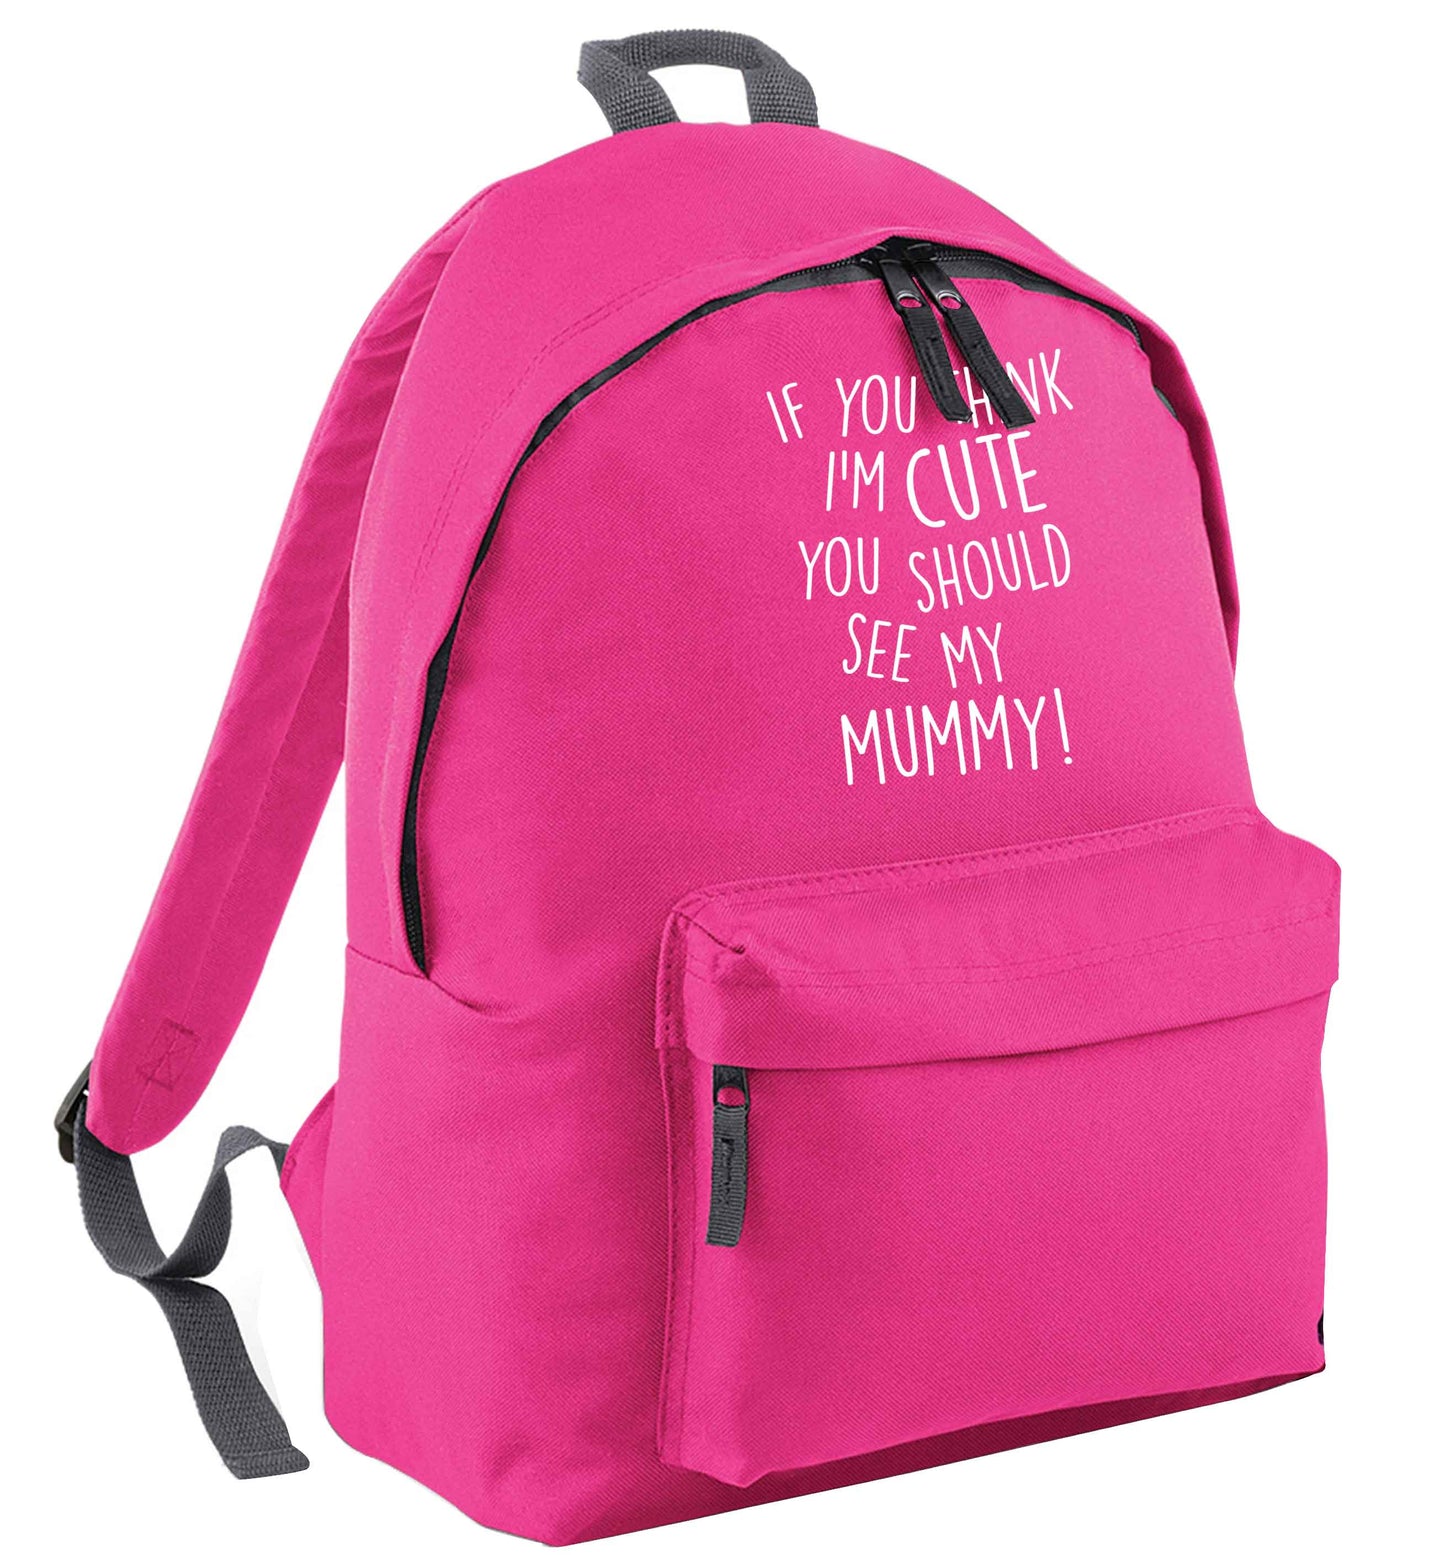 If you think I'm cute you should see my mummy pink childrens backpack